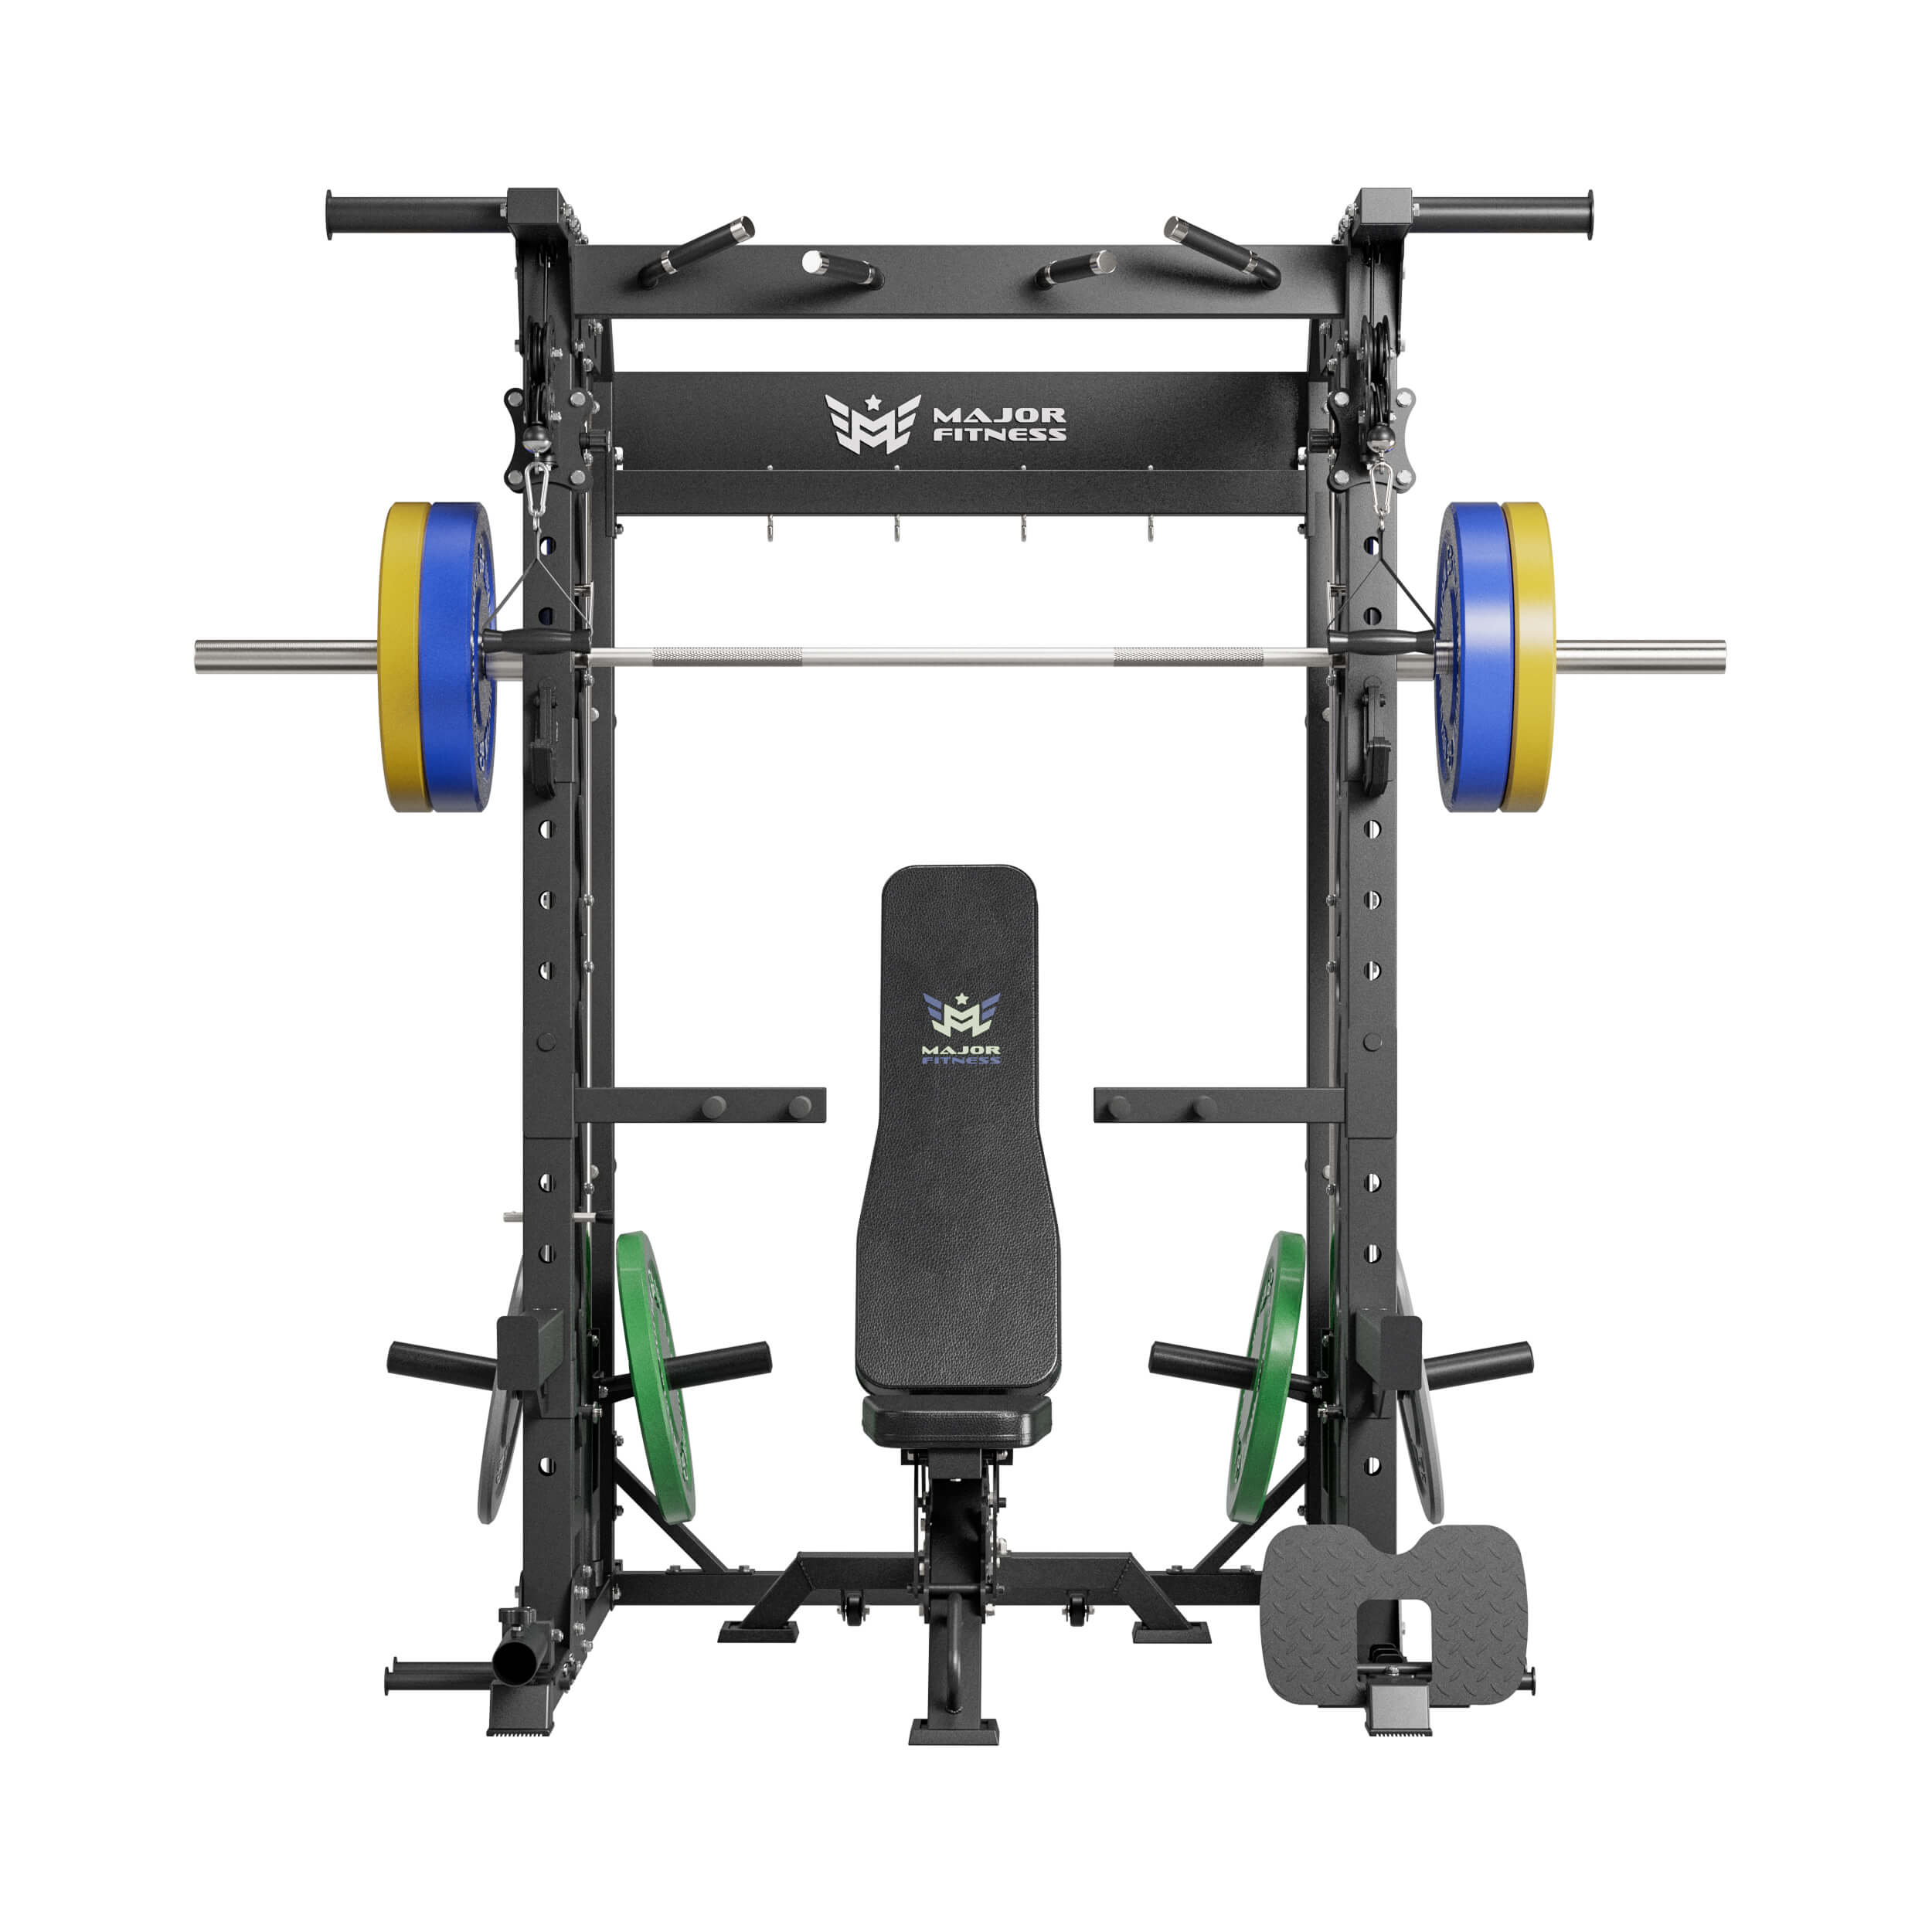 MAJOR FITNESS All-In-One Home Gym Smith Machine Package Spirit B52